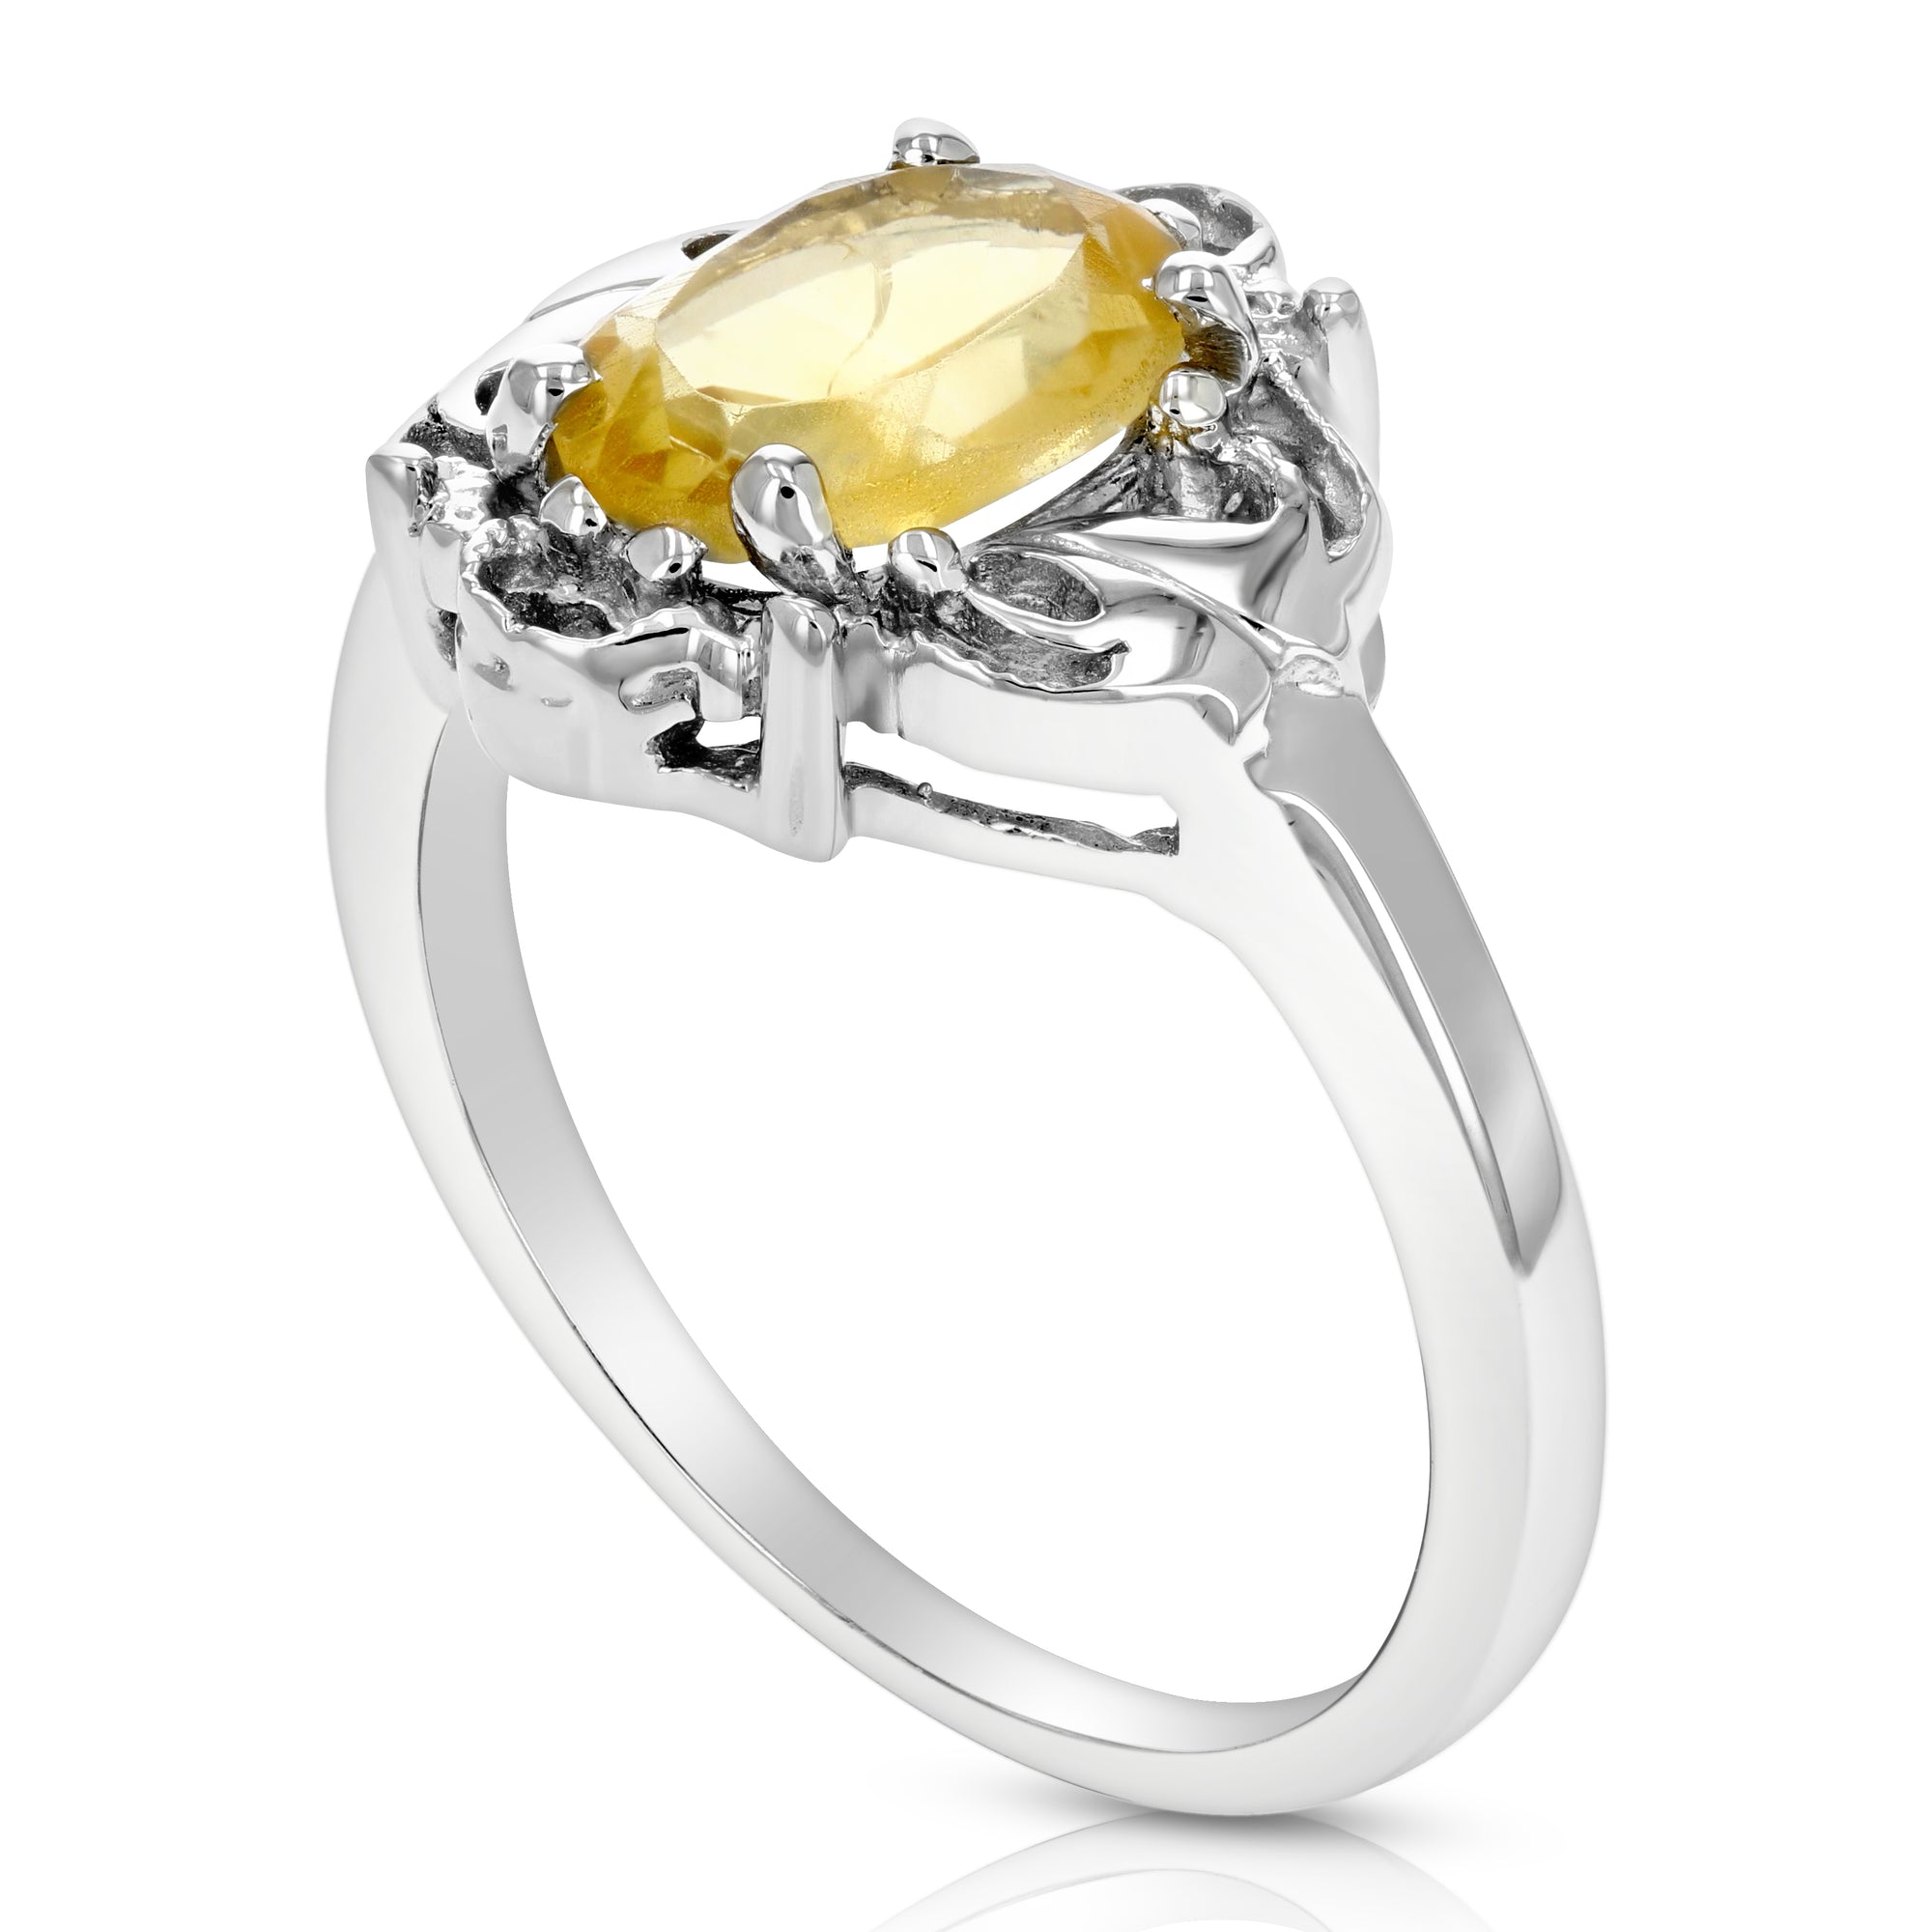 1.60 cttw Citrine Ring .925 Sterling Silver with Rhodium Plating Oval Shape